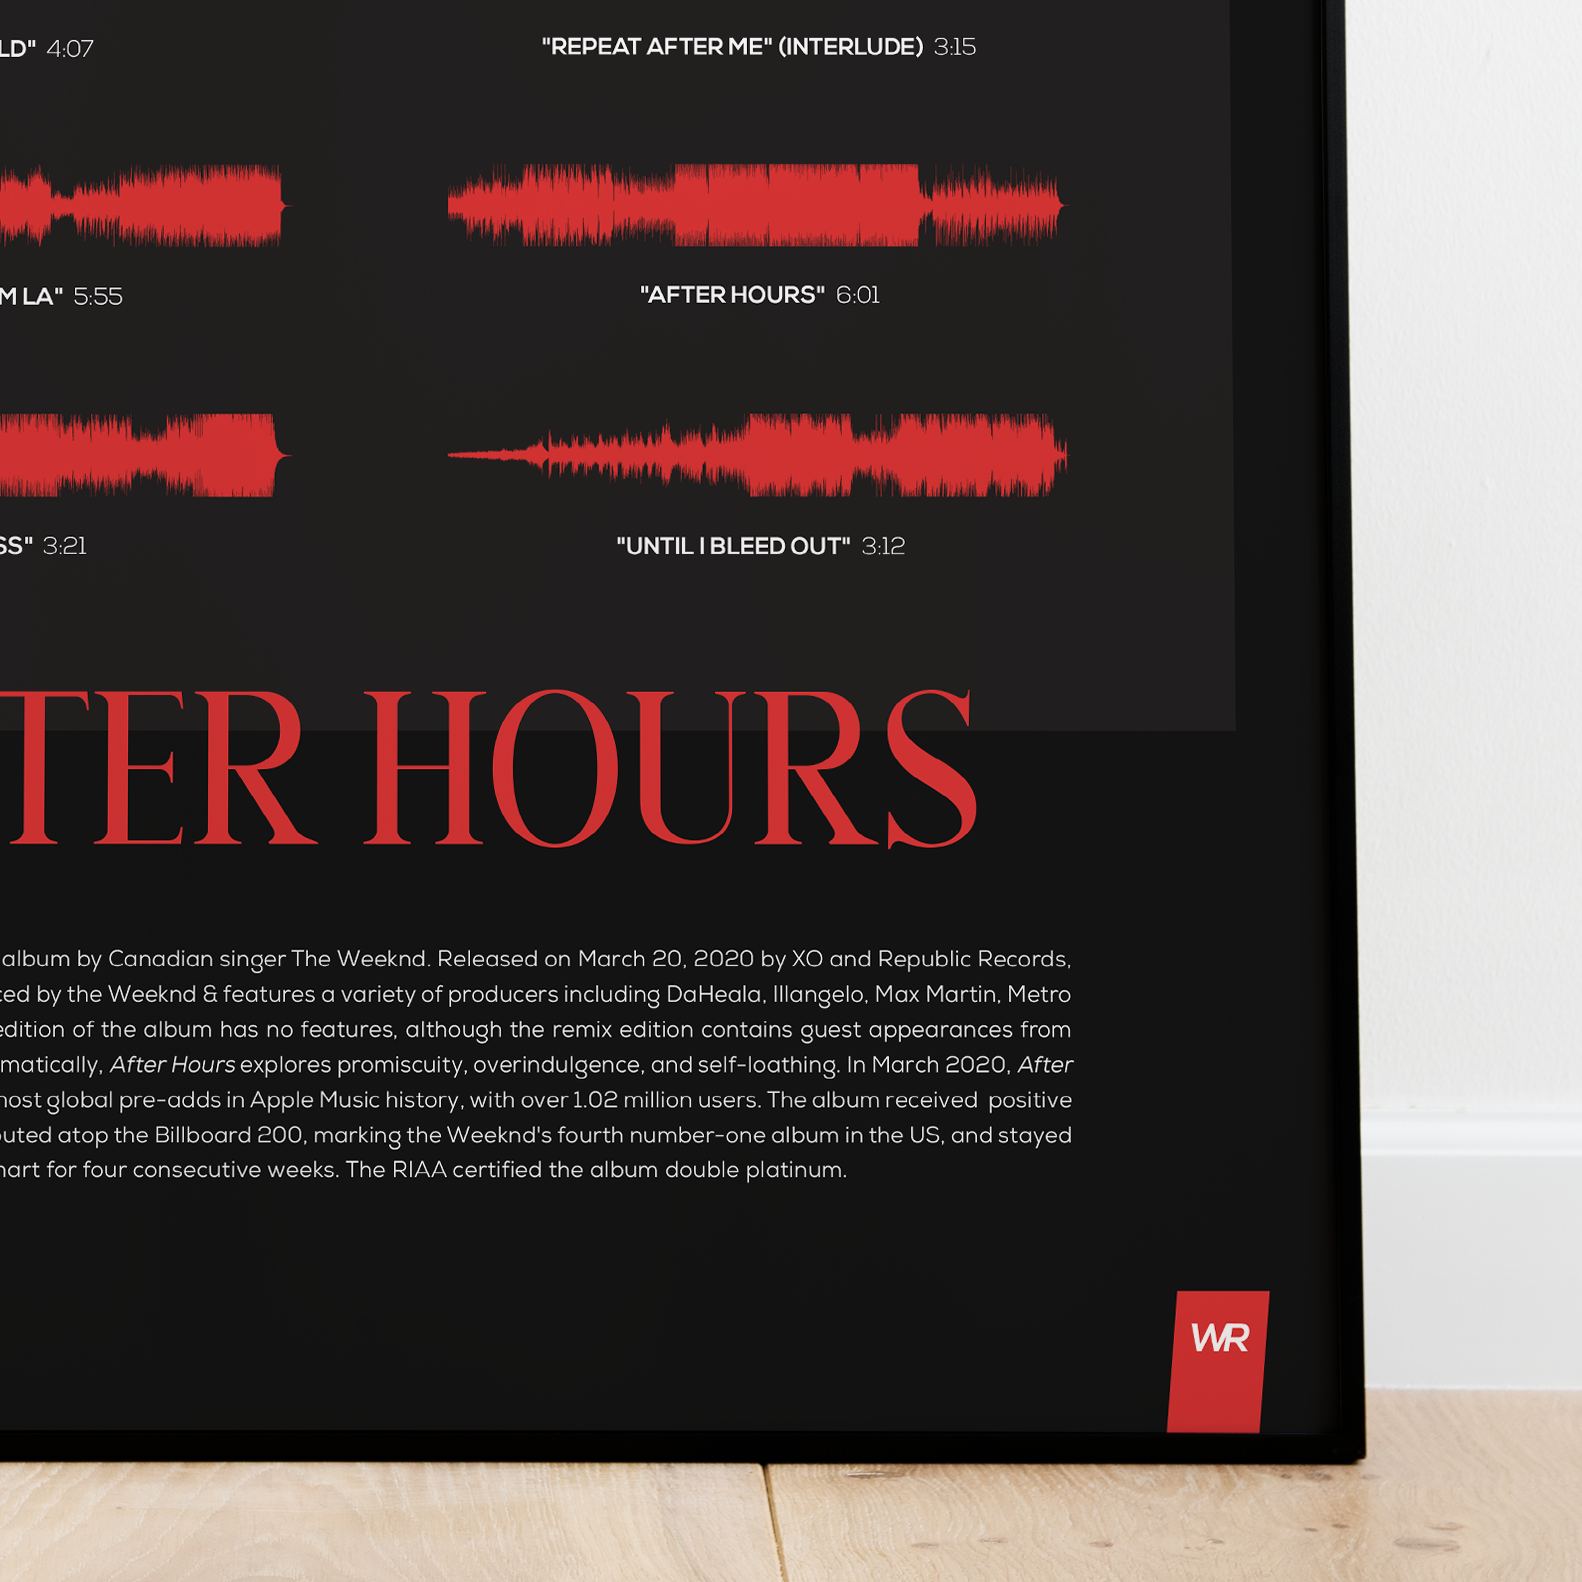 The Weeknd 'Once In A Life Time Experience' Poster – Posters Plug